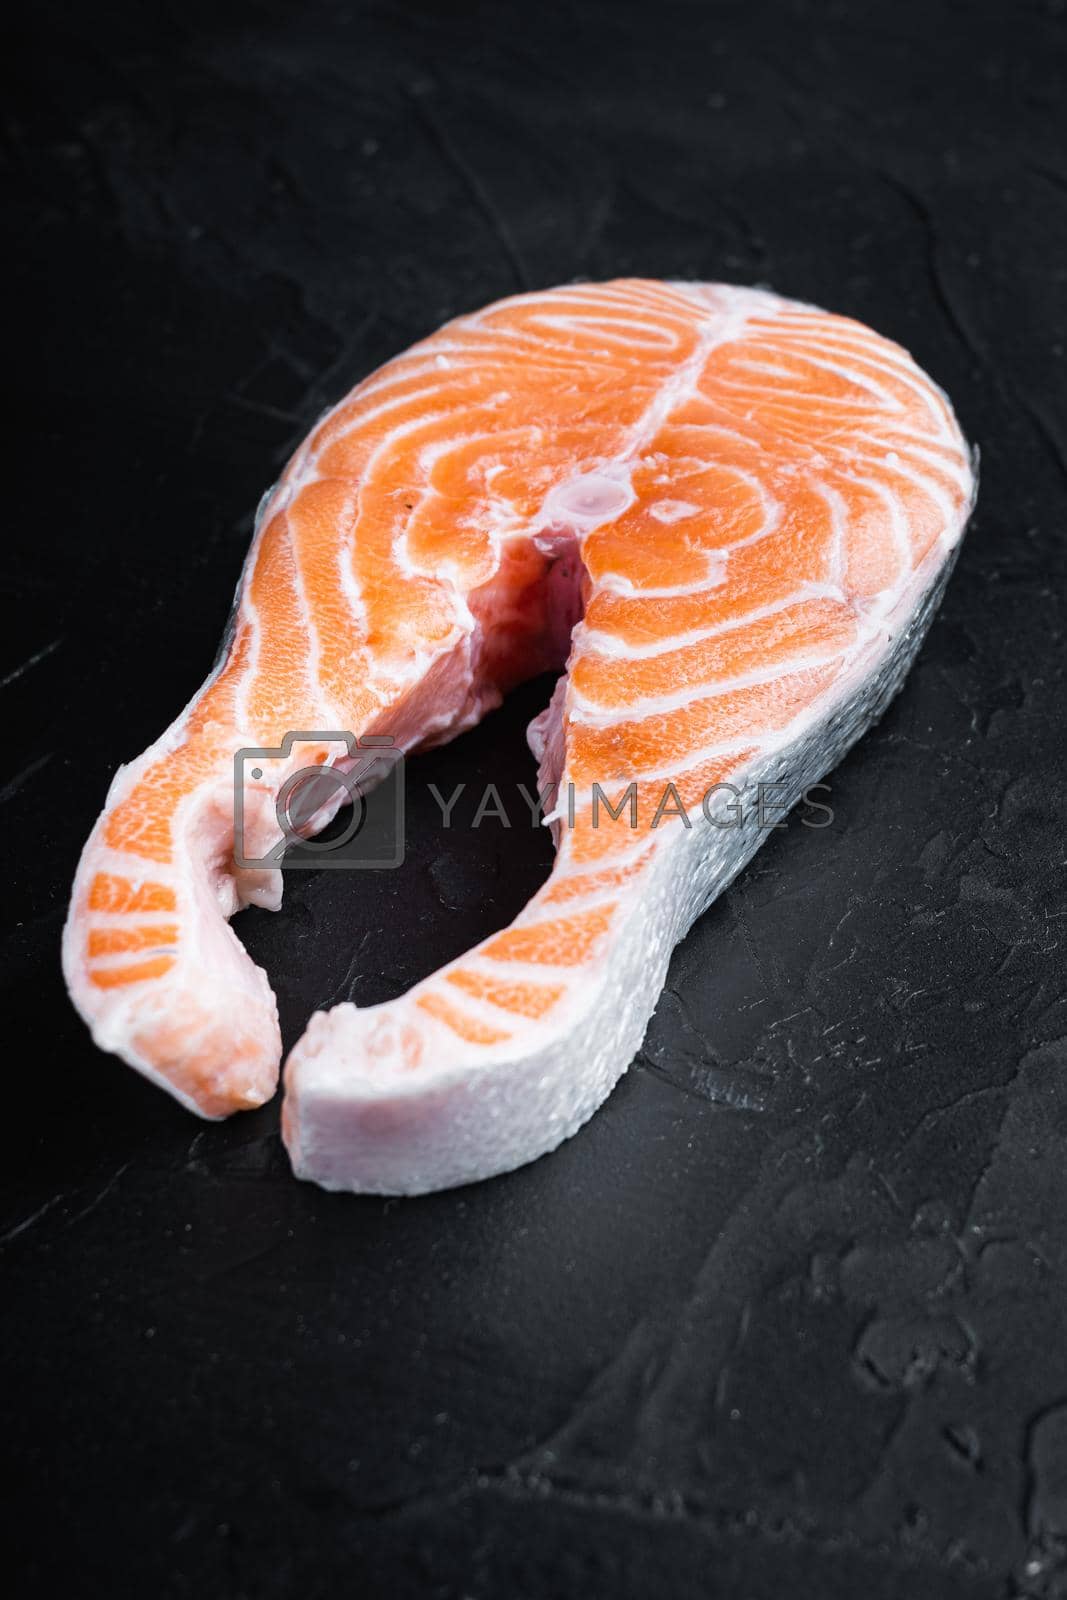 Royalty free image of Fesh raw trout fillet, over black background by Ilianesolenyi